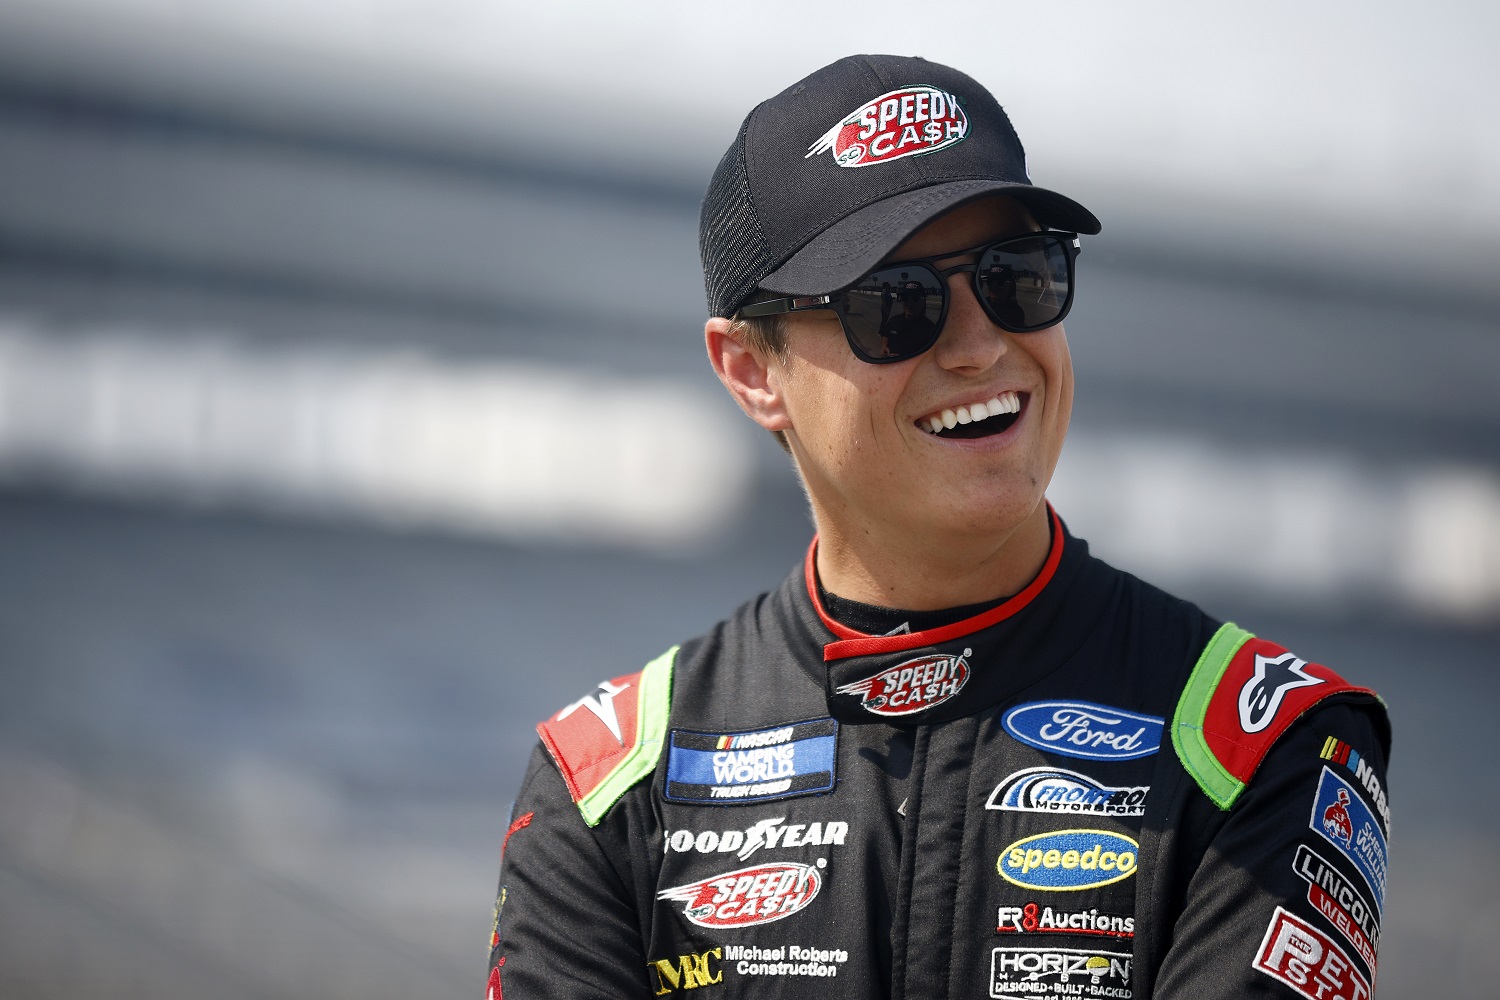 Zane Smith smiles on the grid during qualifying for the NASCAR Camping World Truck Series SpeedyCash.com 220 at Texas Motor Speedway on May 20, 2022 in Fort Worth, Texas.